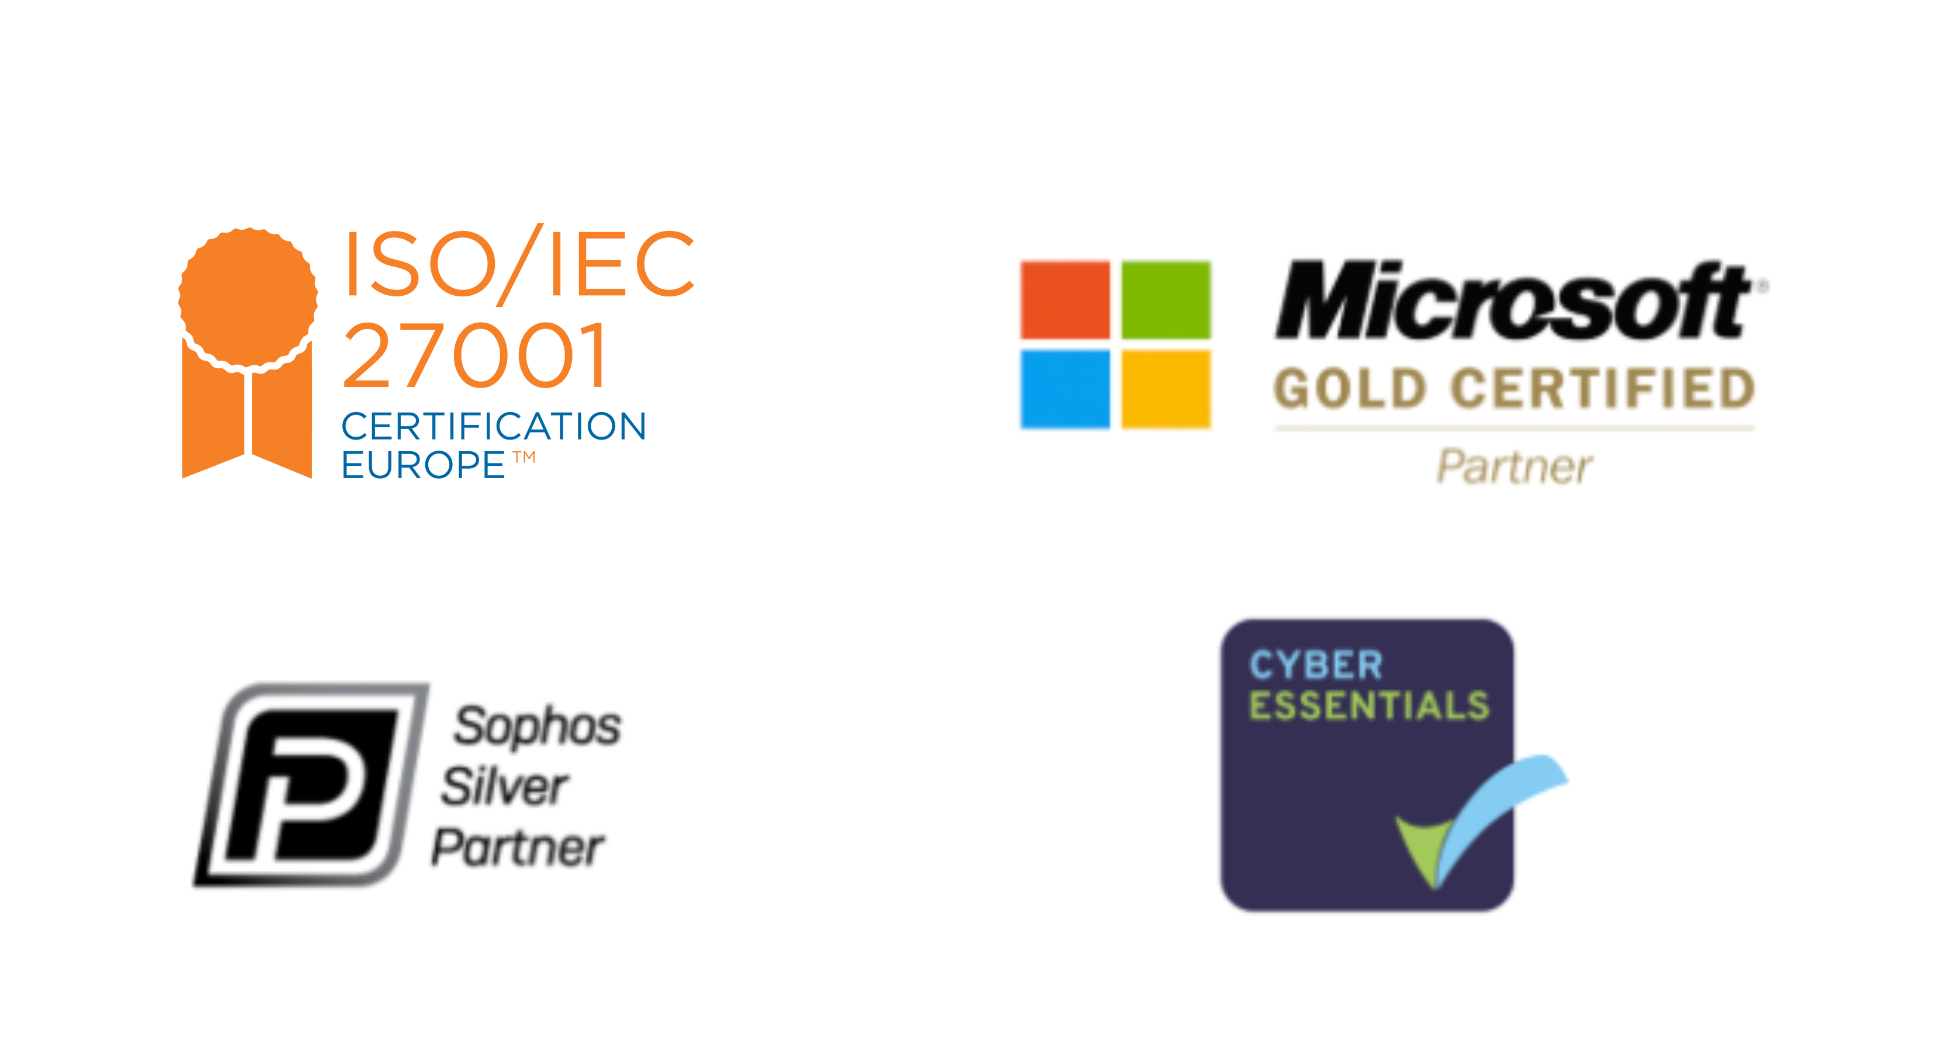 Our certifications & accreditations